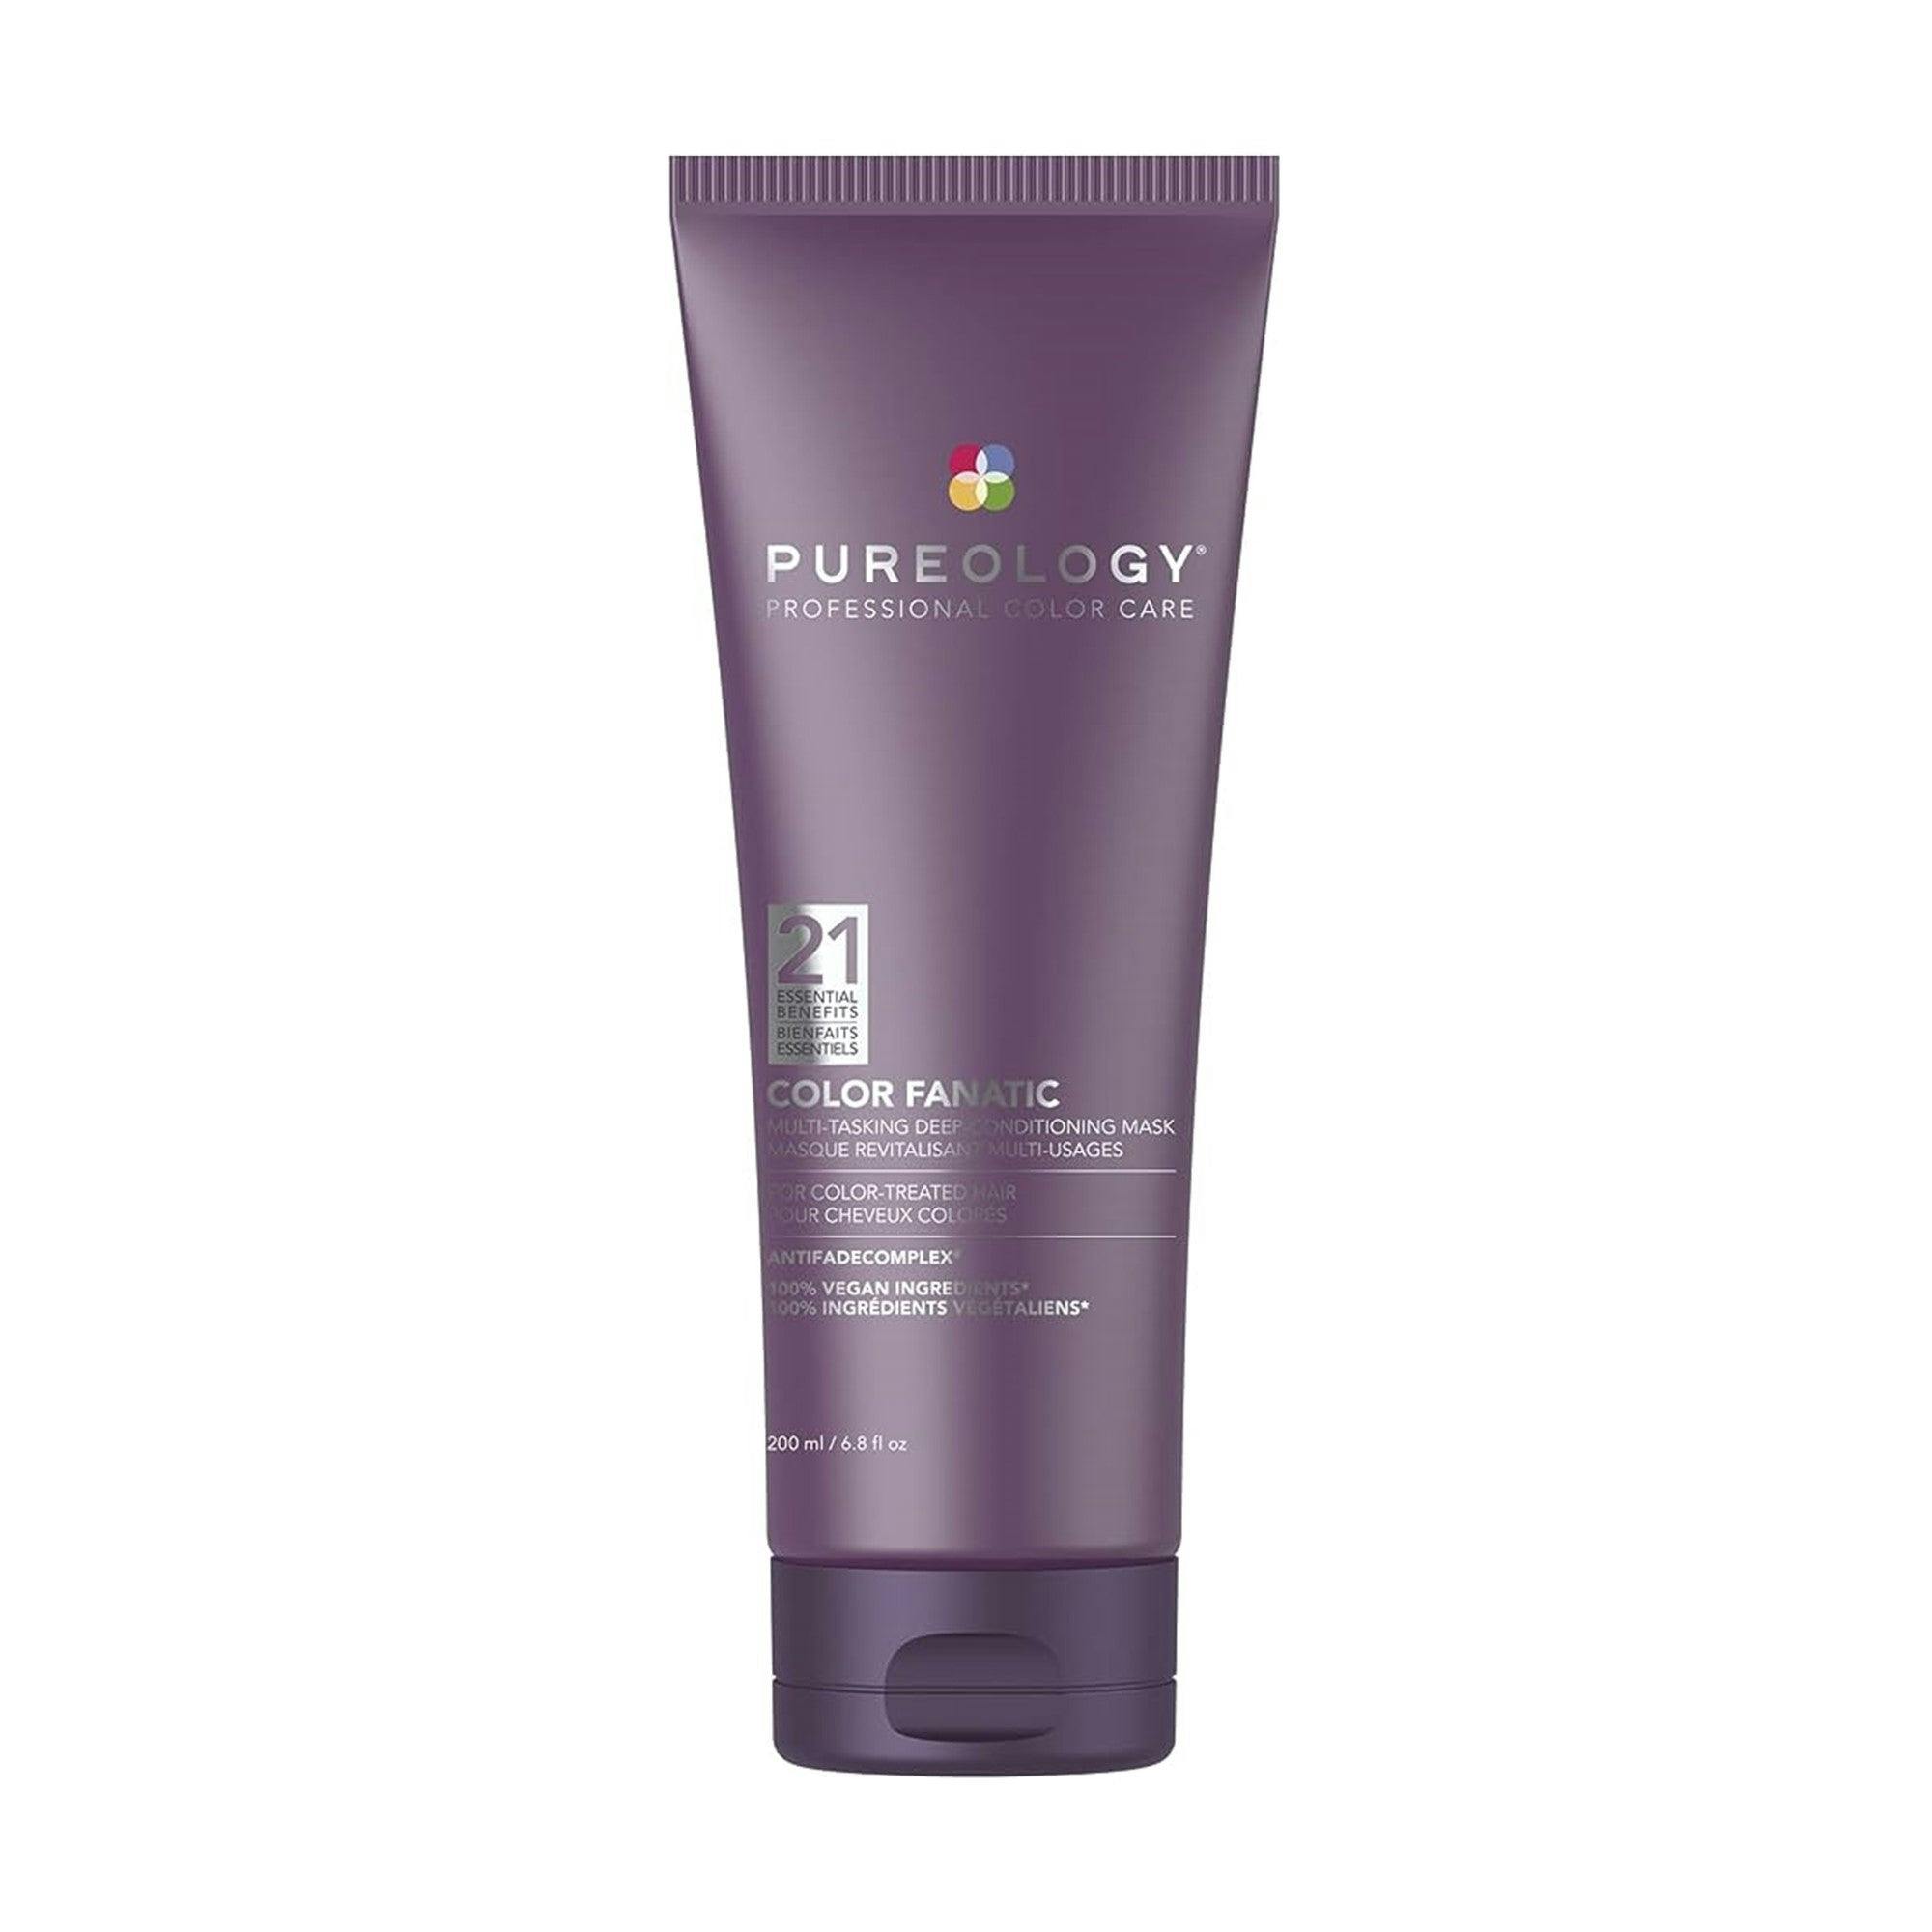 Pureology Colour Fanatic Multi-Tasking Deep-Conditioning Masque 200ml